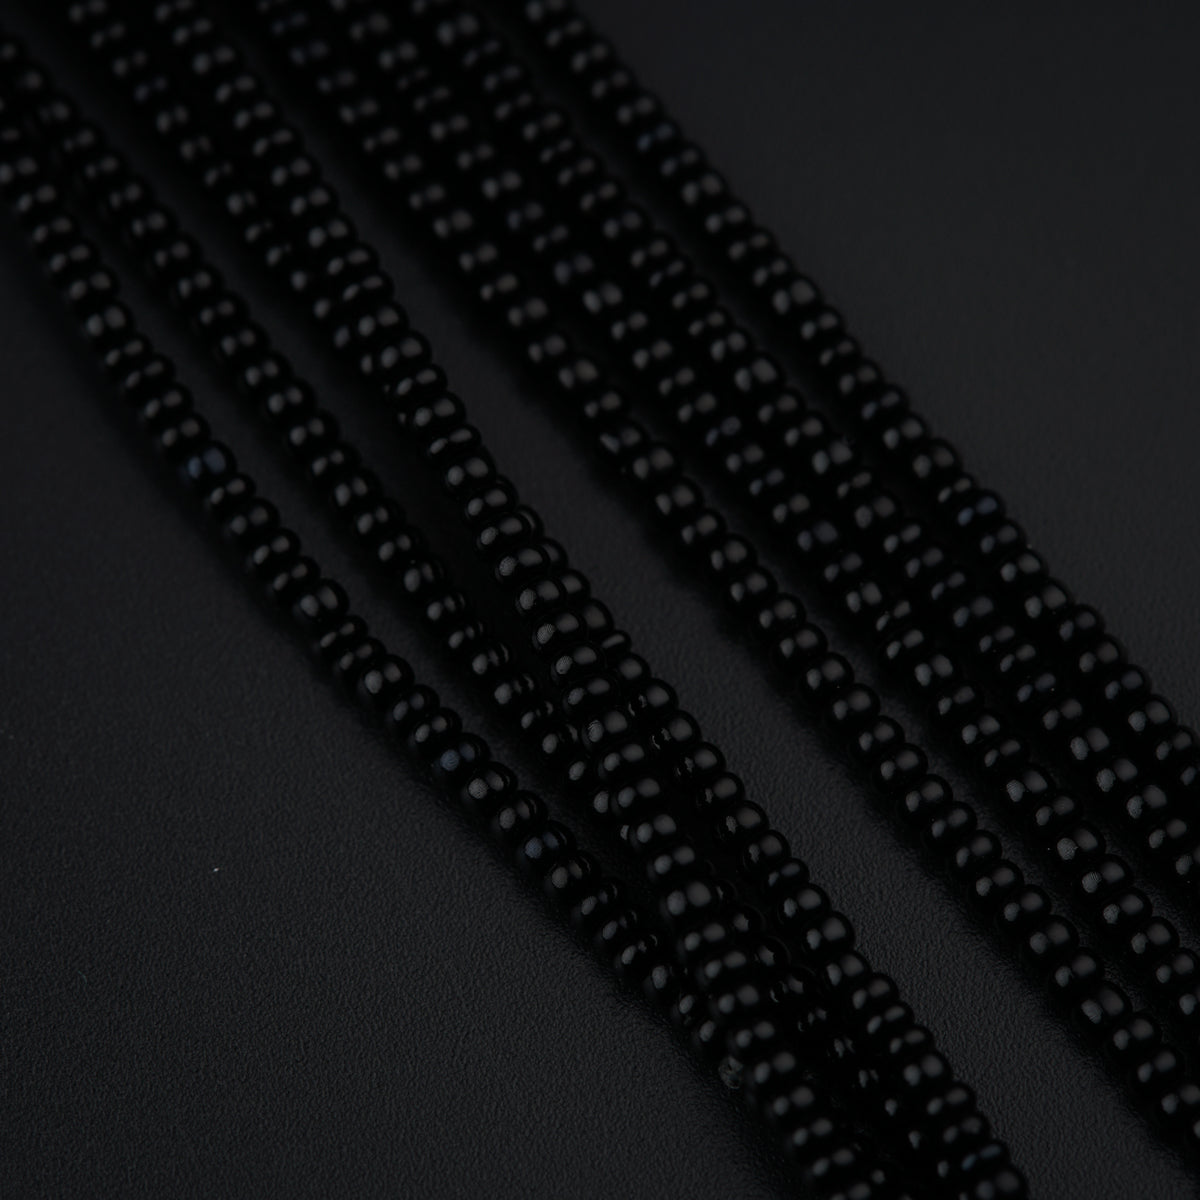 a close up of beads on a black surface